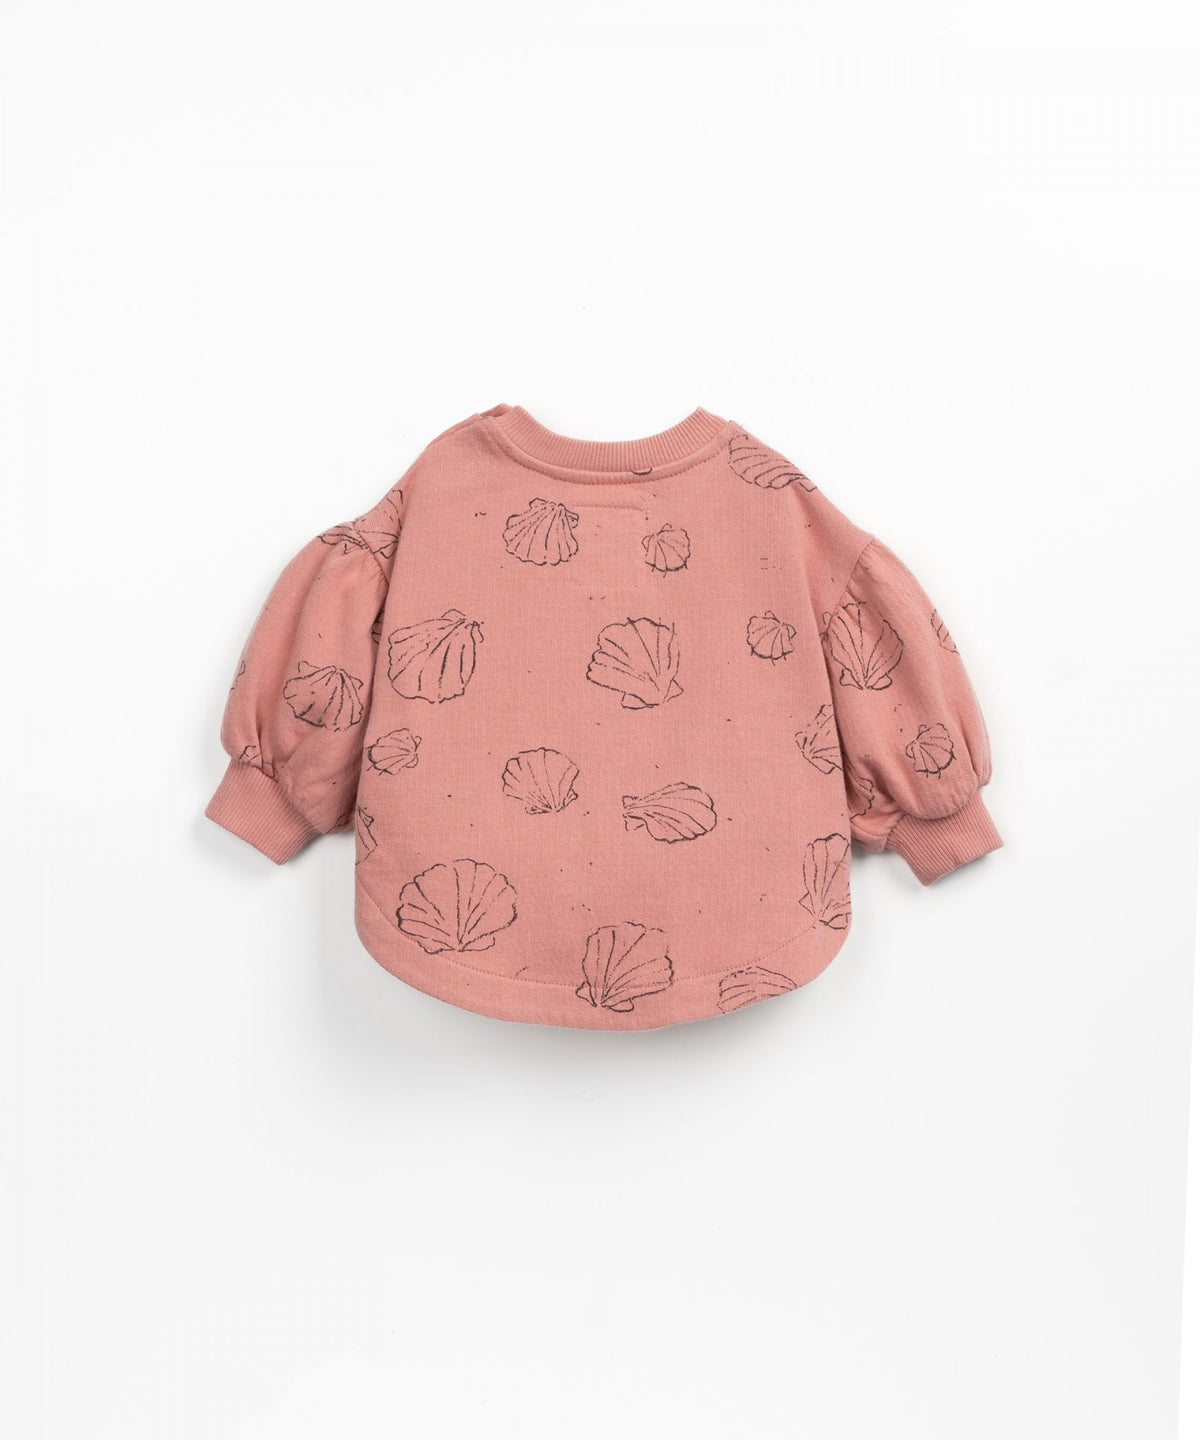 Play UP Sweater with round cut &Shorts with shells print set